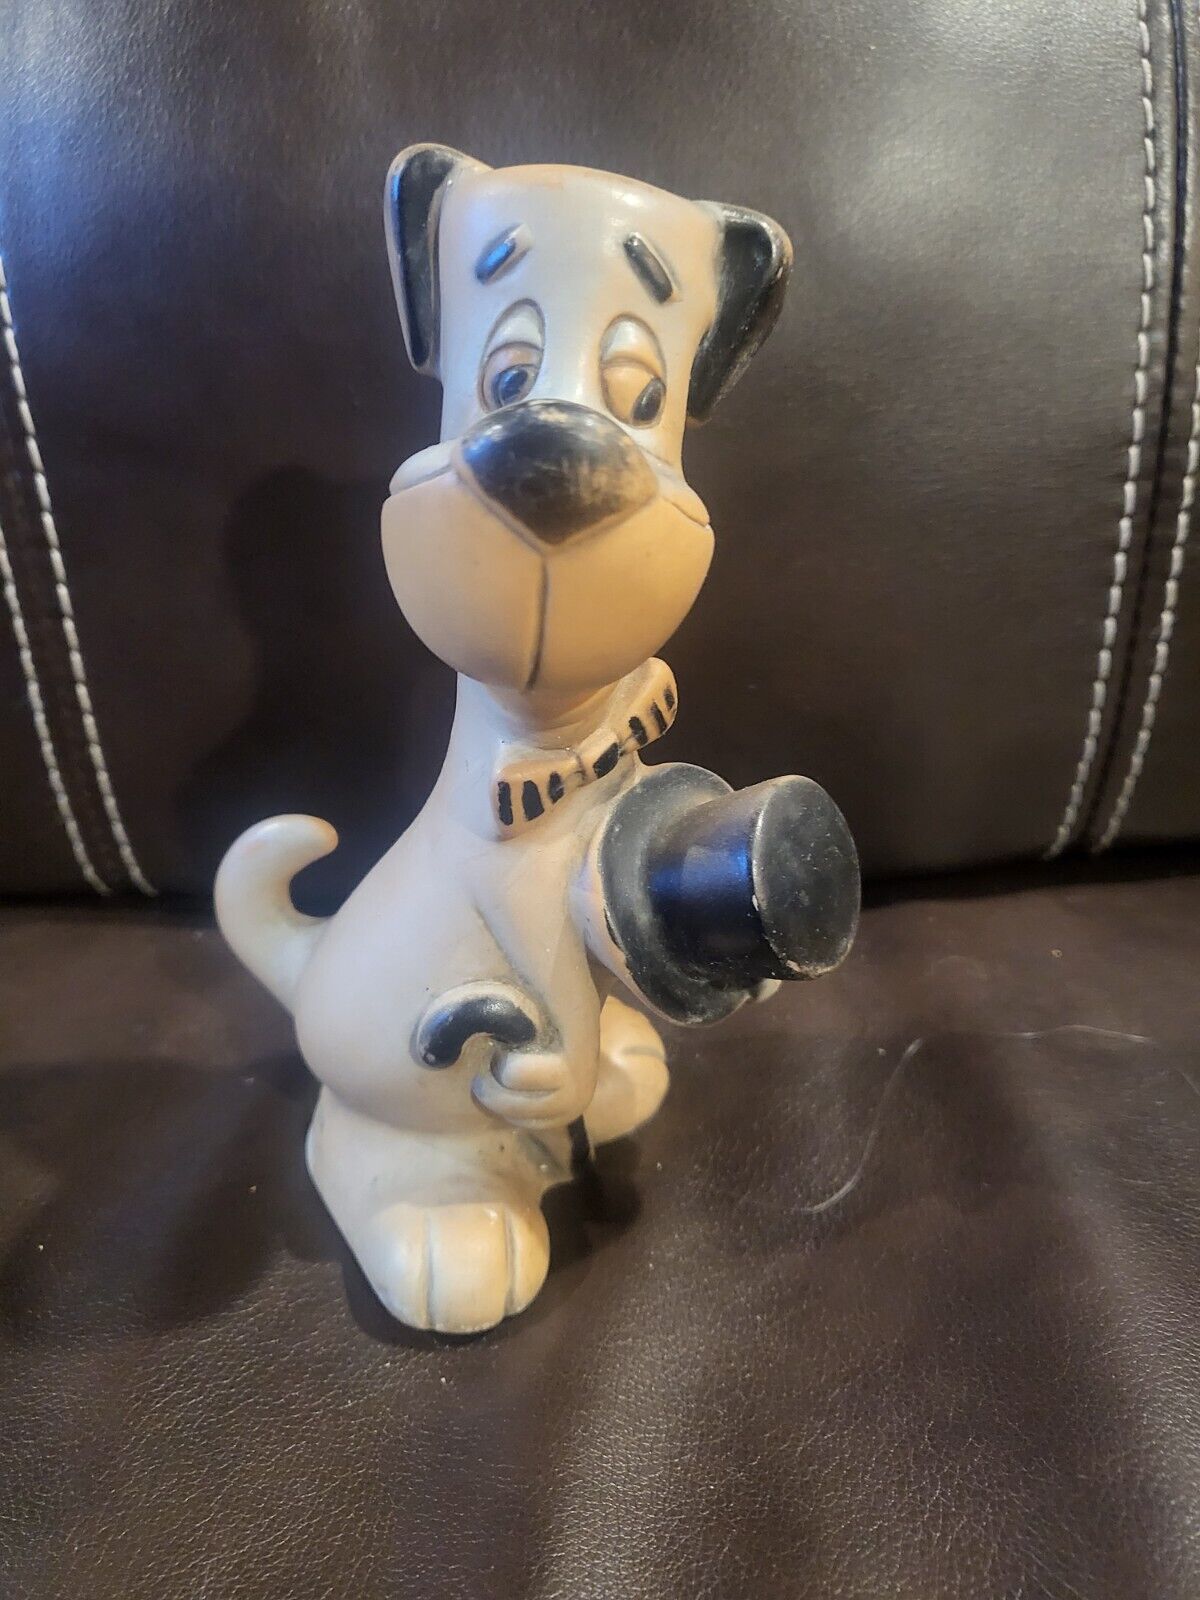 Vintage Huckleberry Hound Rubber Squeaky Toy- DELL HANNA- BARBERA Productions